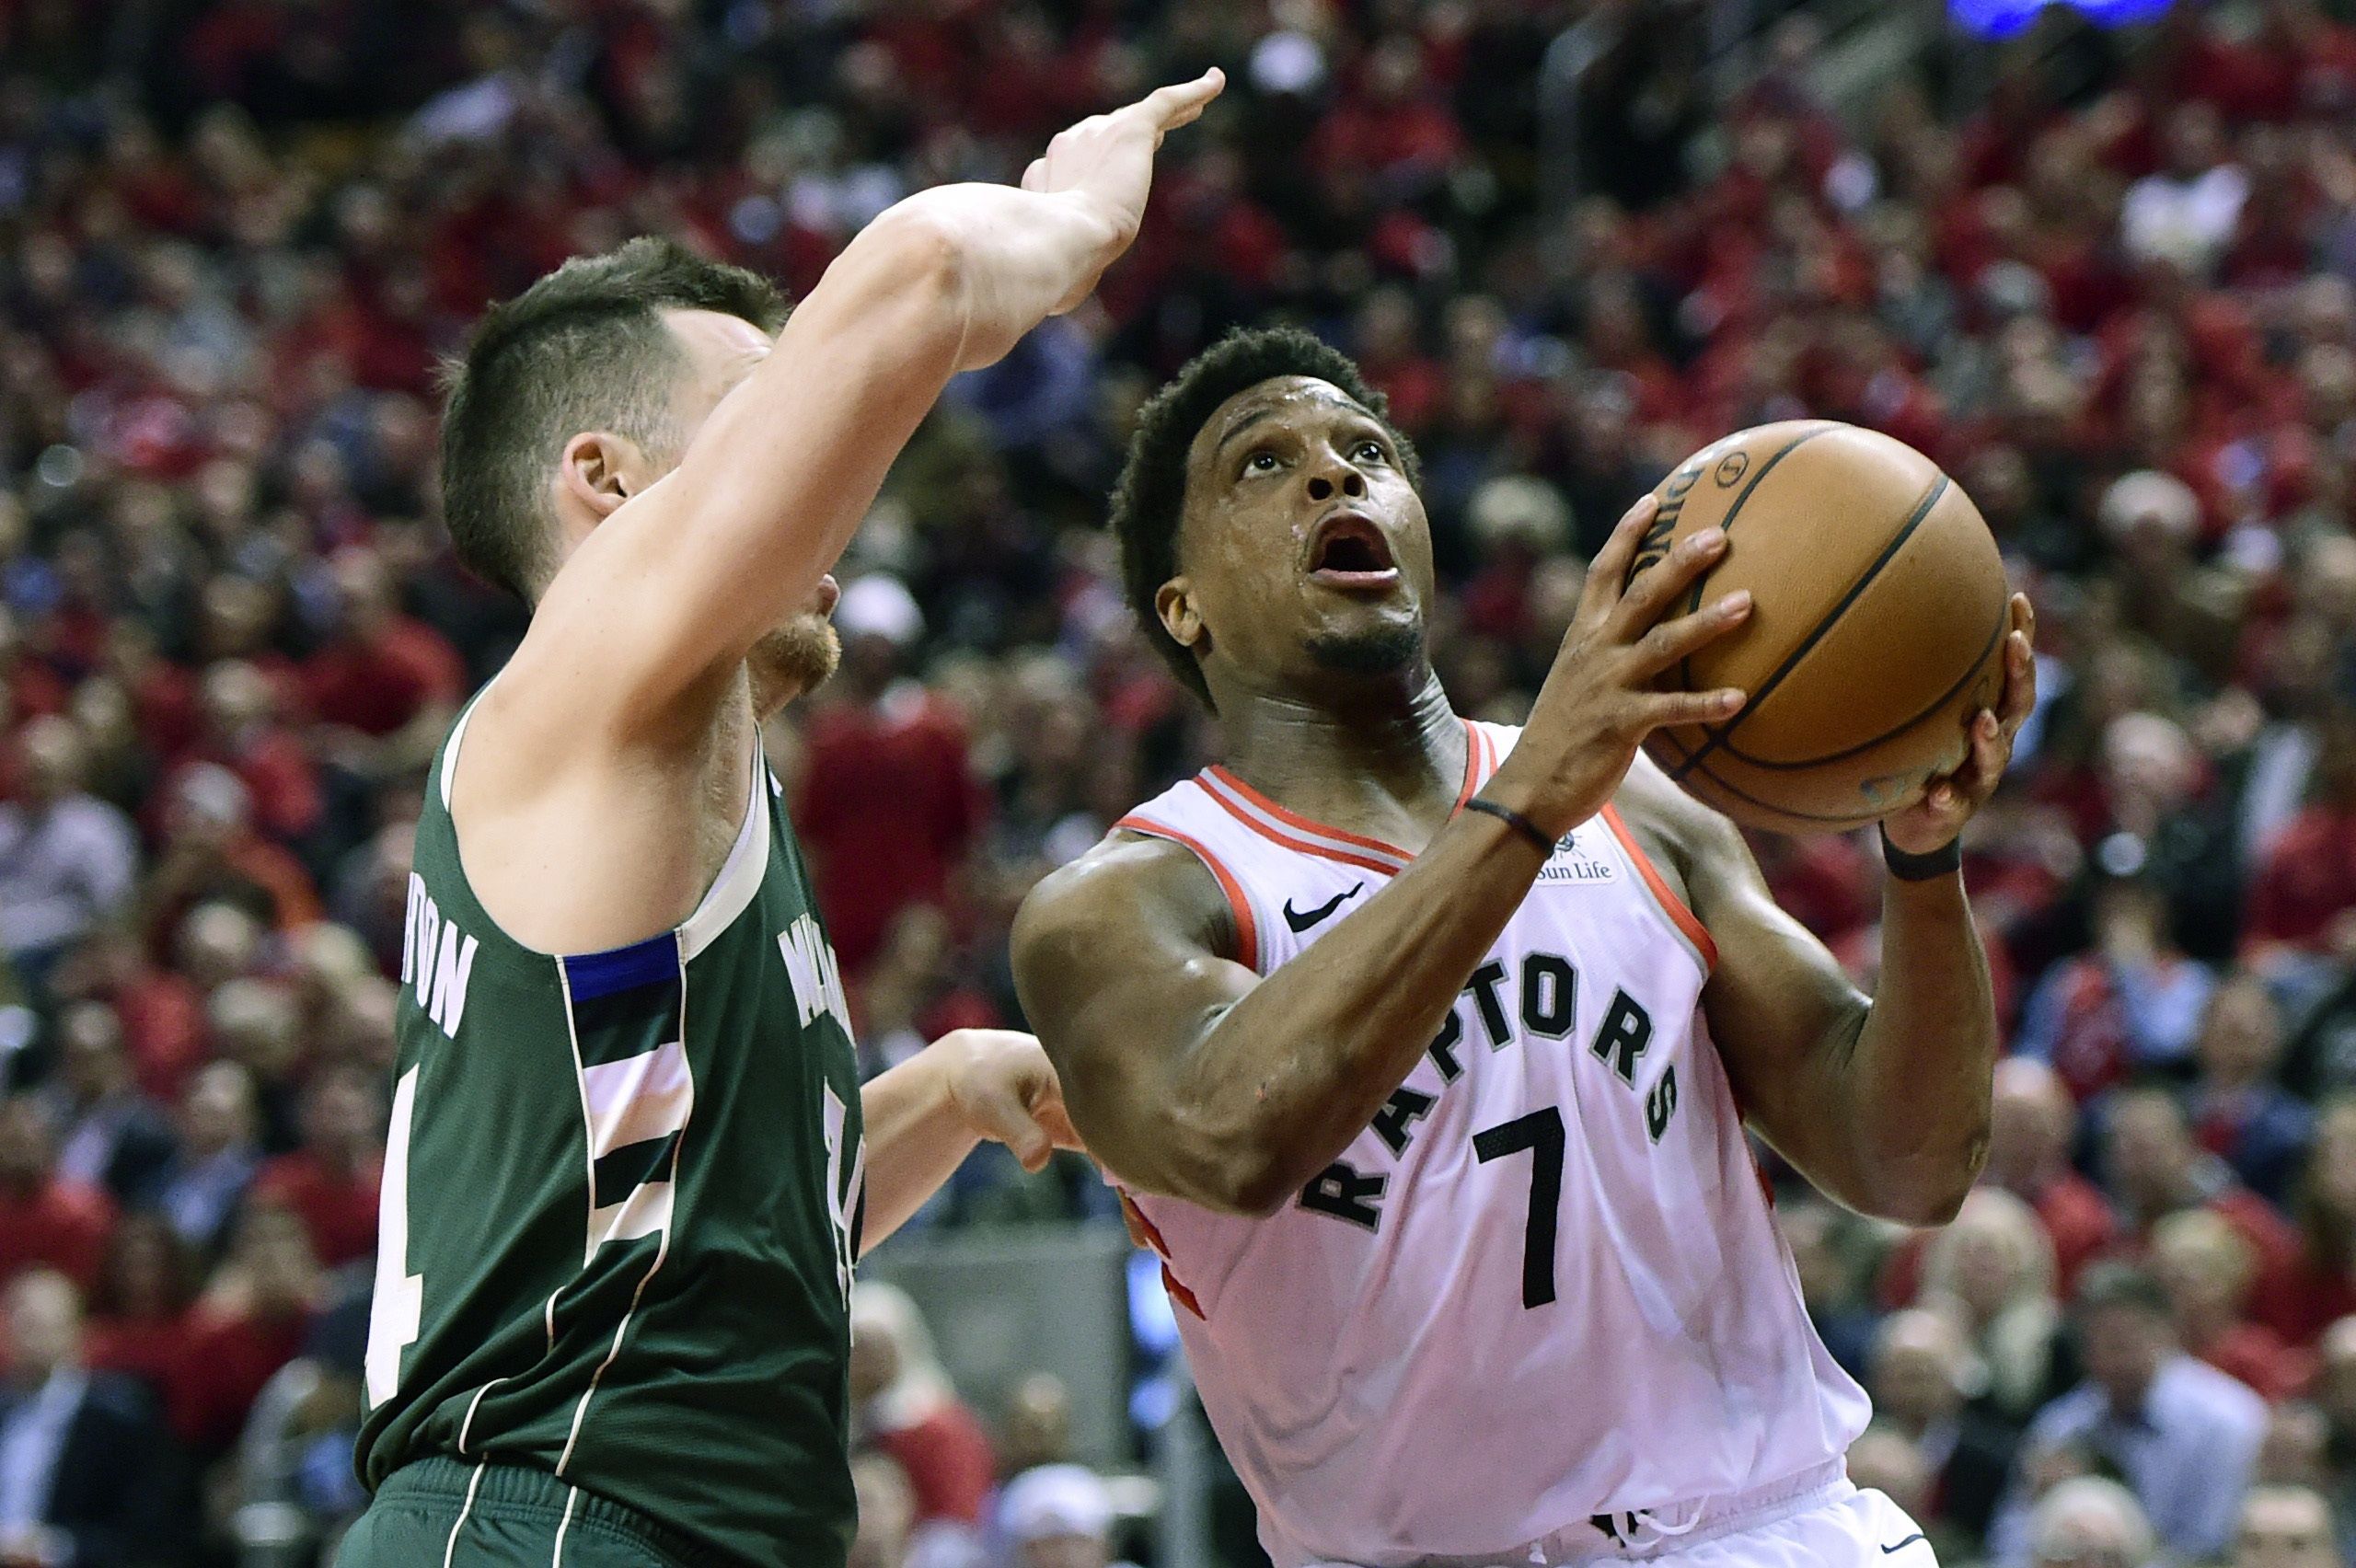 Kyle Lowry Has 25 As Raptors Rout Bucks To Even East Finals The Boston Globe